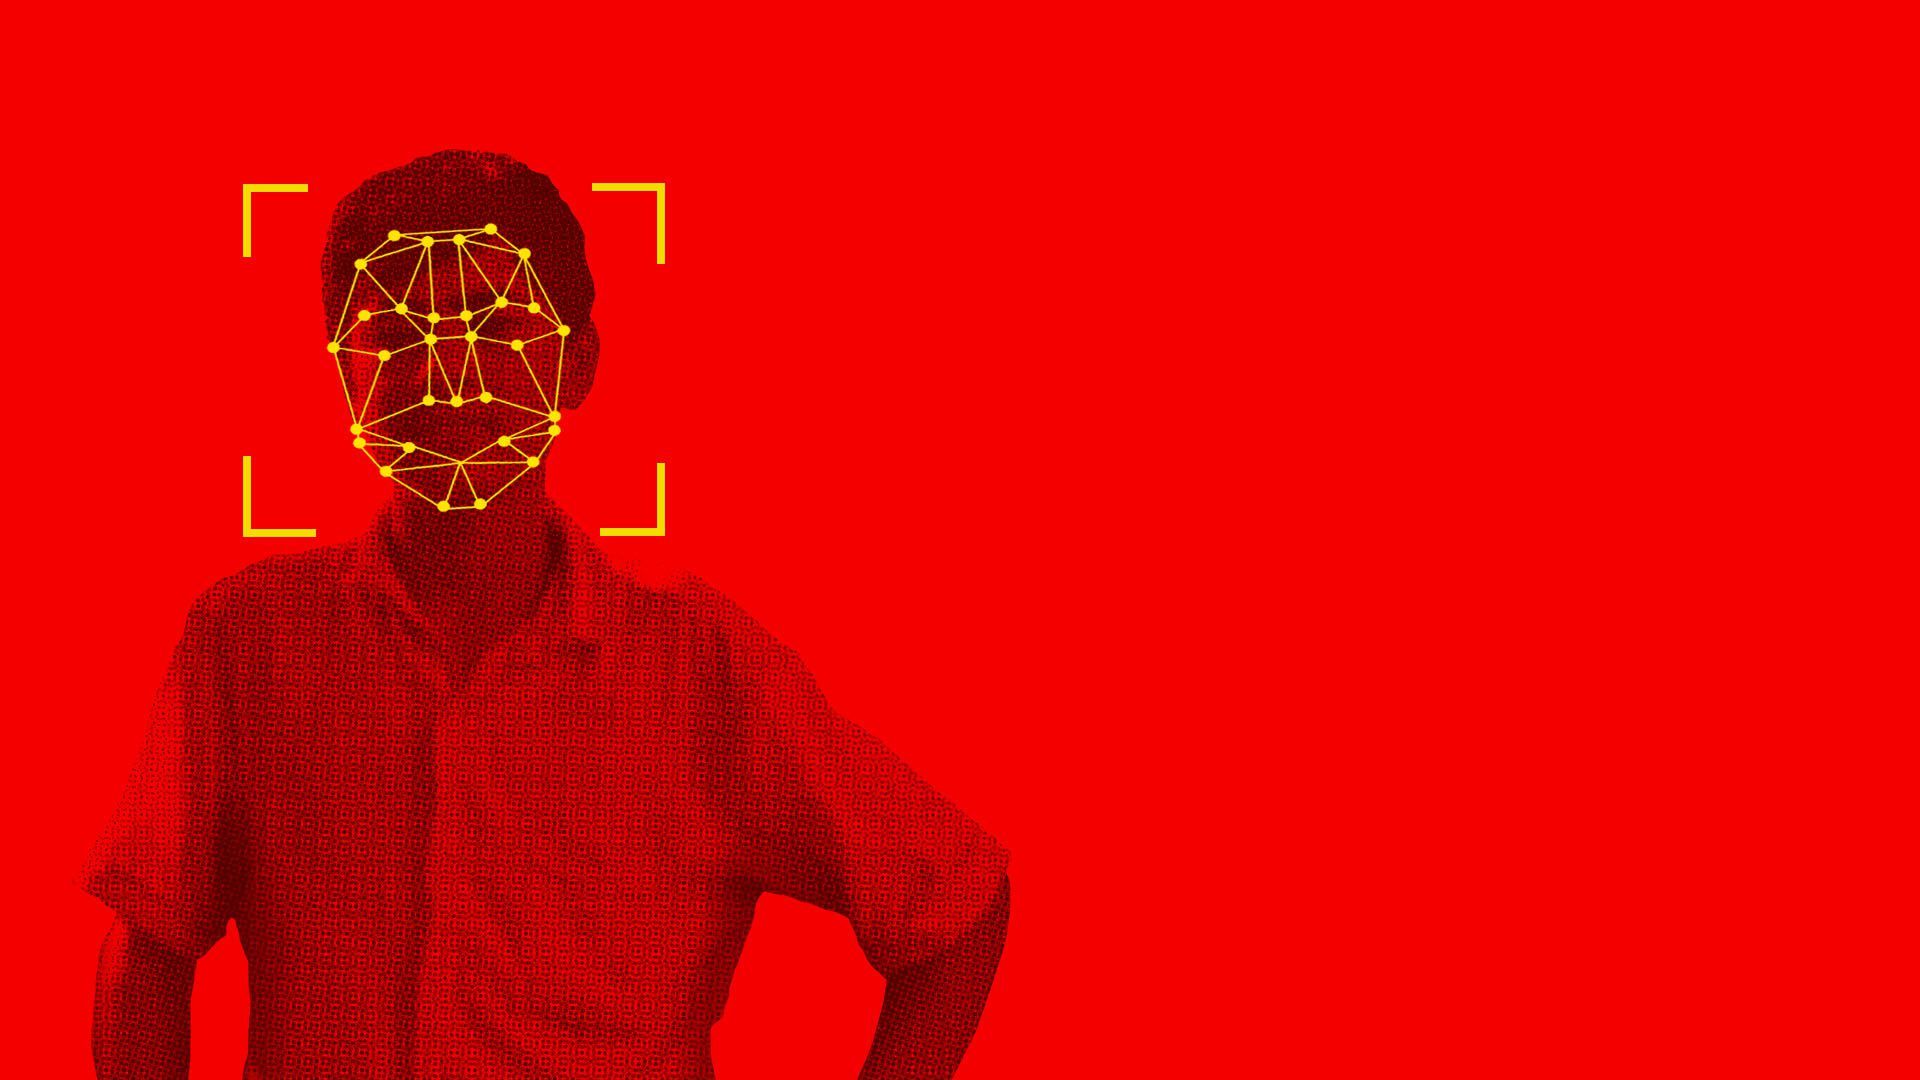 Illustration of a person targeted by face-recognition technology